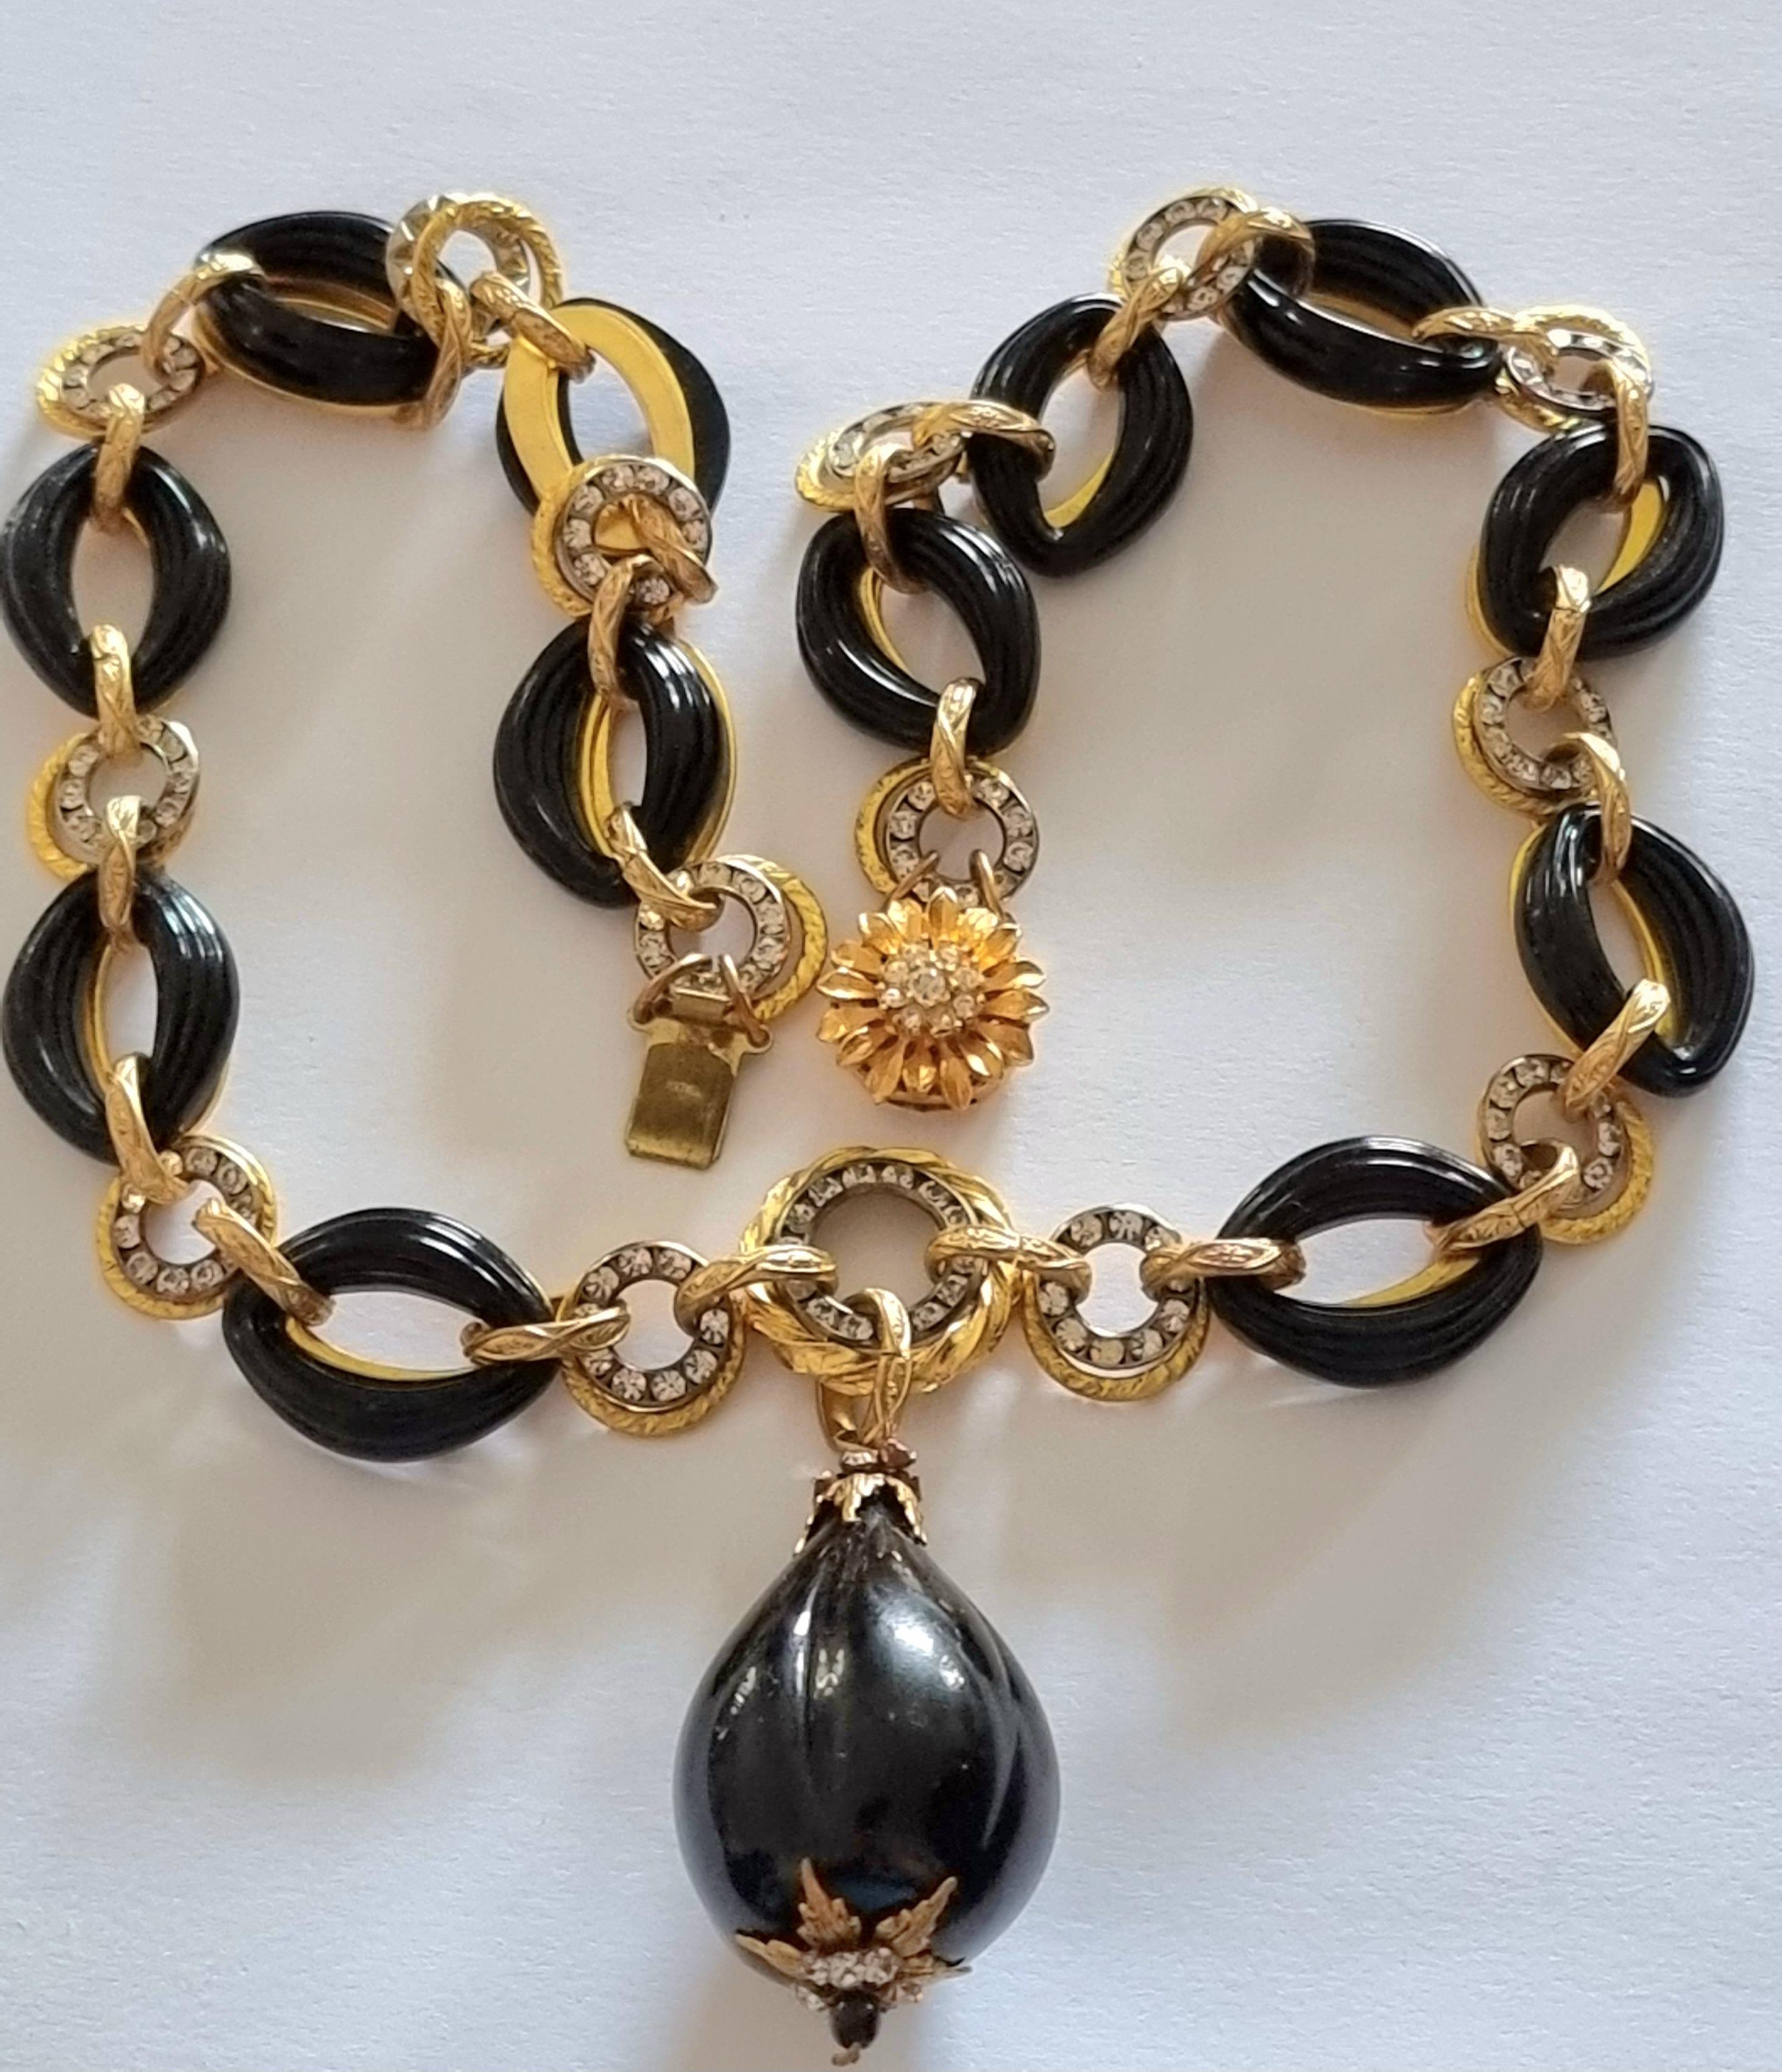 CHANEL, Magnificent vintage NECKLACE, High Fashion, France 5